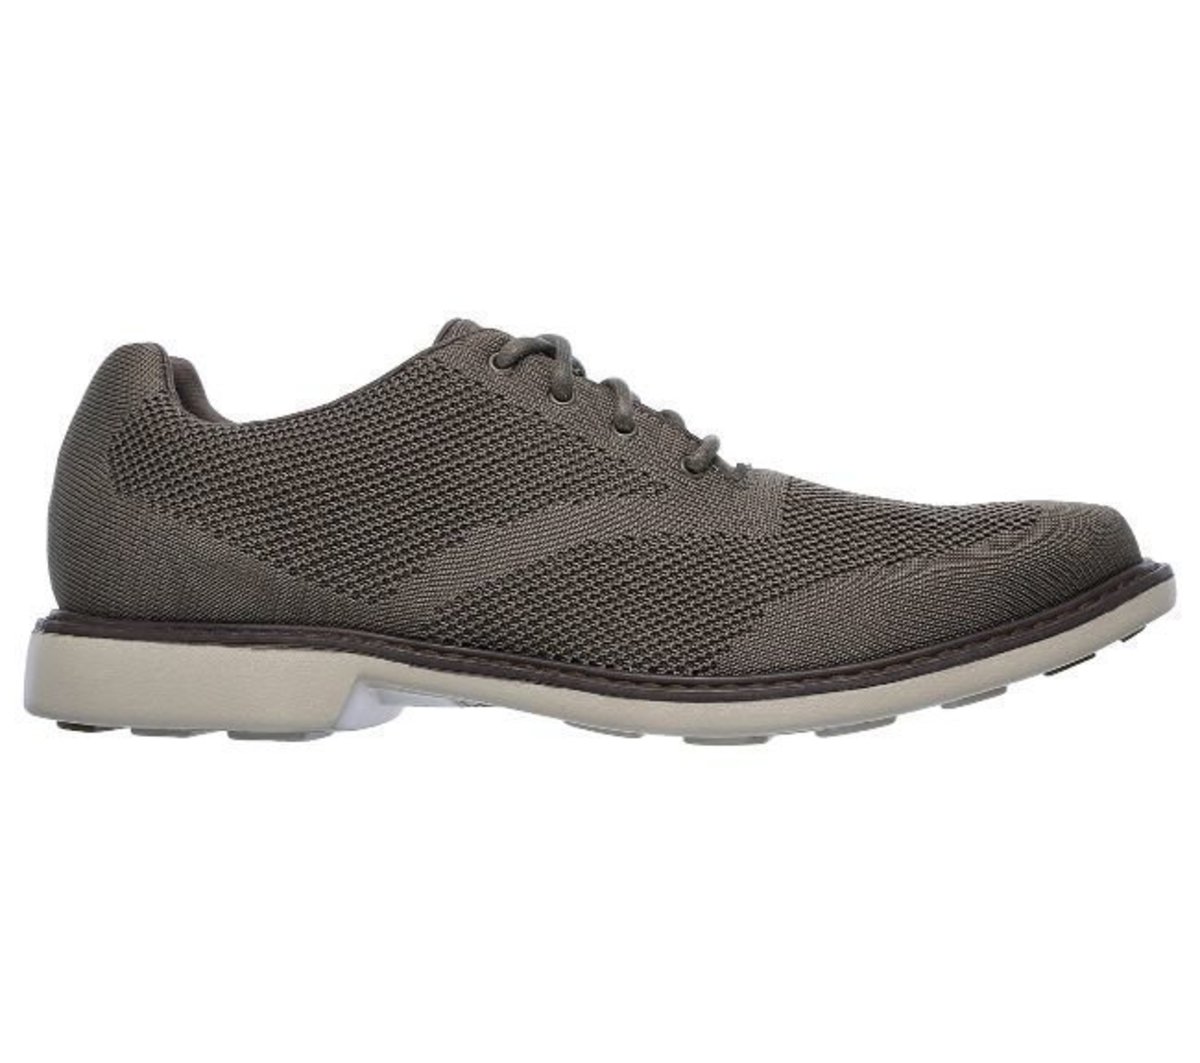 dyb engagement Opiate SKECHERS | MARK NASON LACE UP MEN'S SHOES | Color : Taupe | Size : US 8 |  HKTVmall The Largest HK Shopping Platform